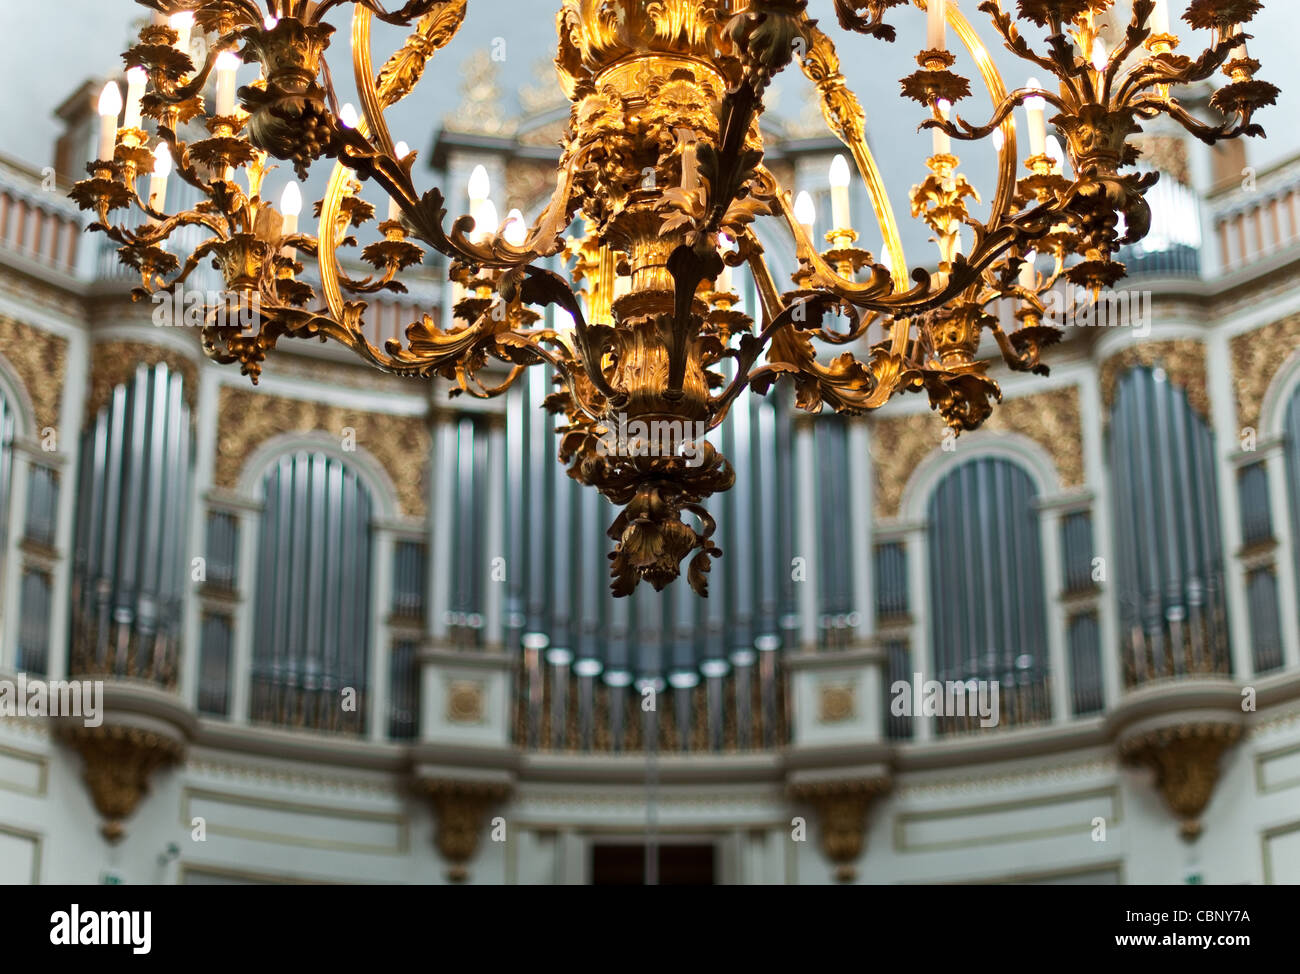 beautiful organ with lamp in foreground in Helsinki cathedral, Finland (focus on lamp) Stock Photo